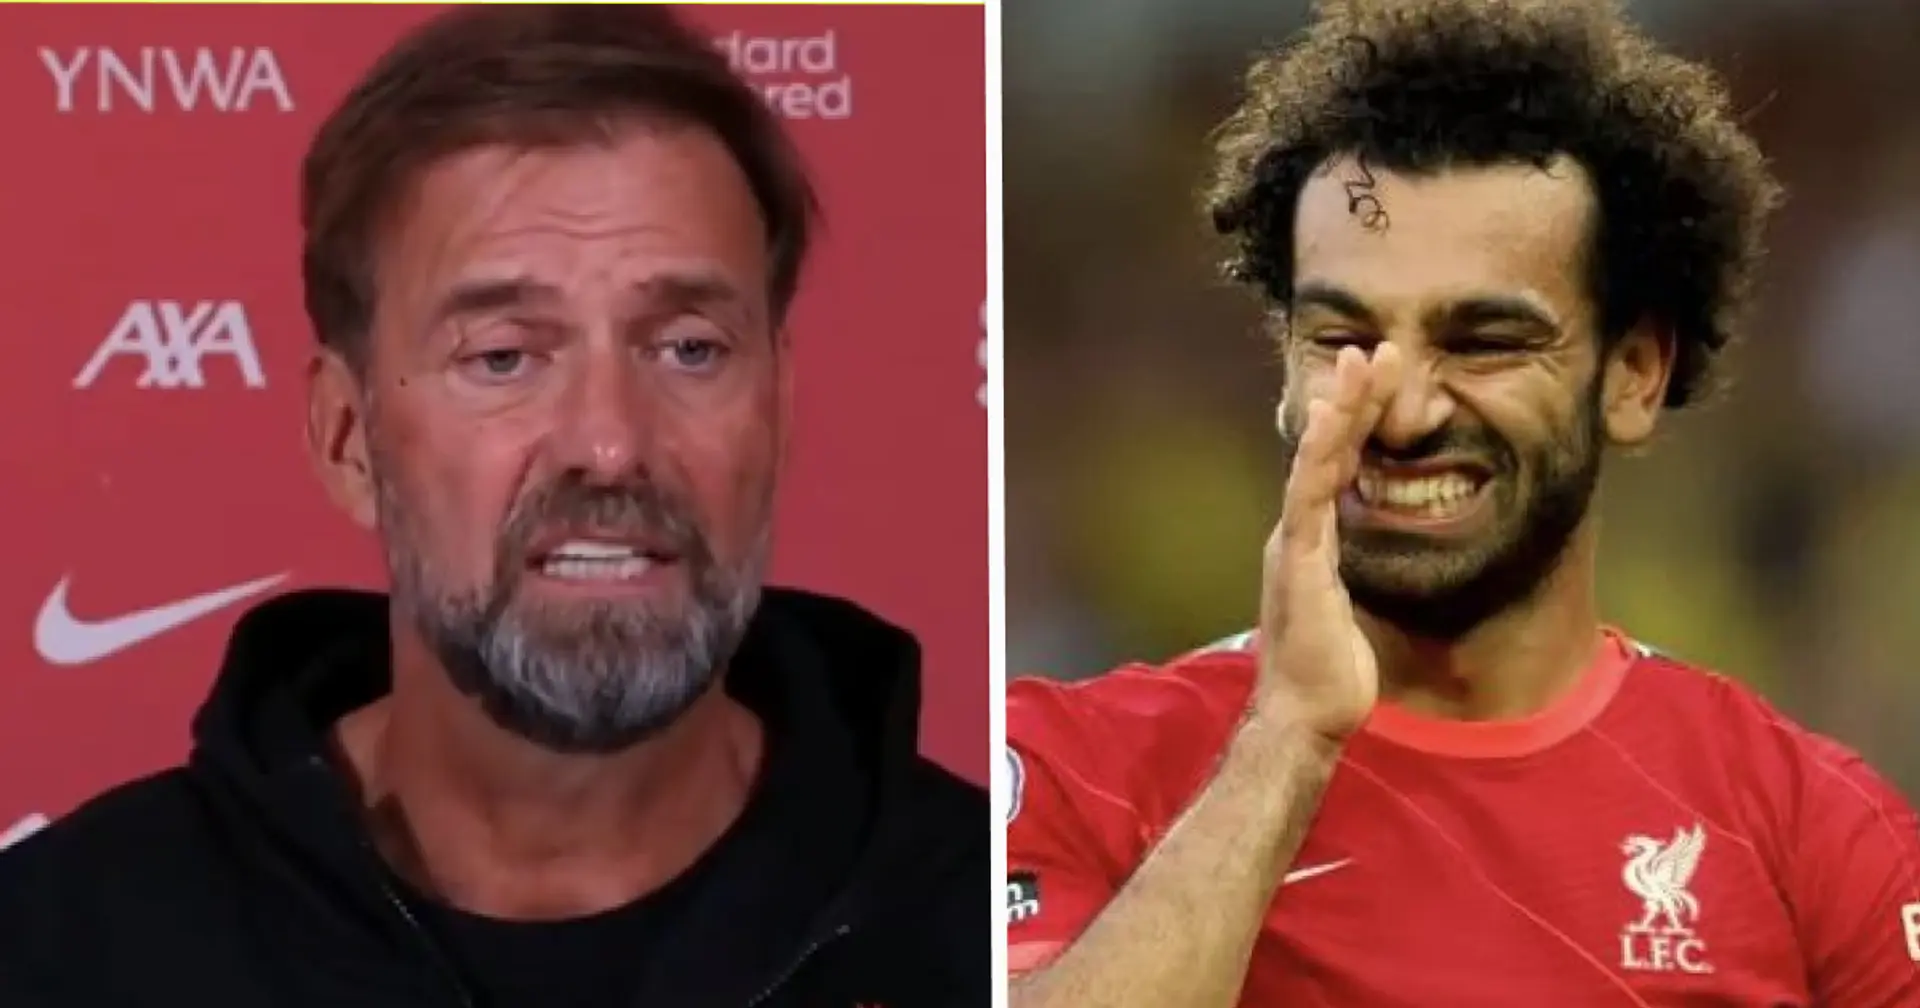 Jurgen Klopp names one Liverpool player he will sign if he ever leaves -- it's not Salah